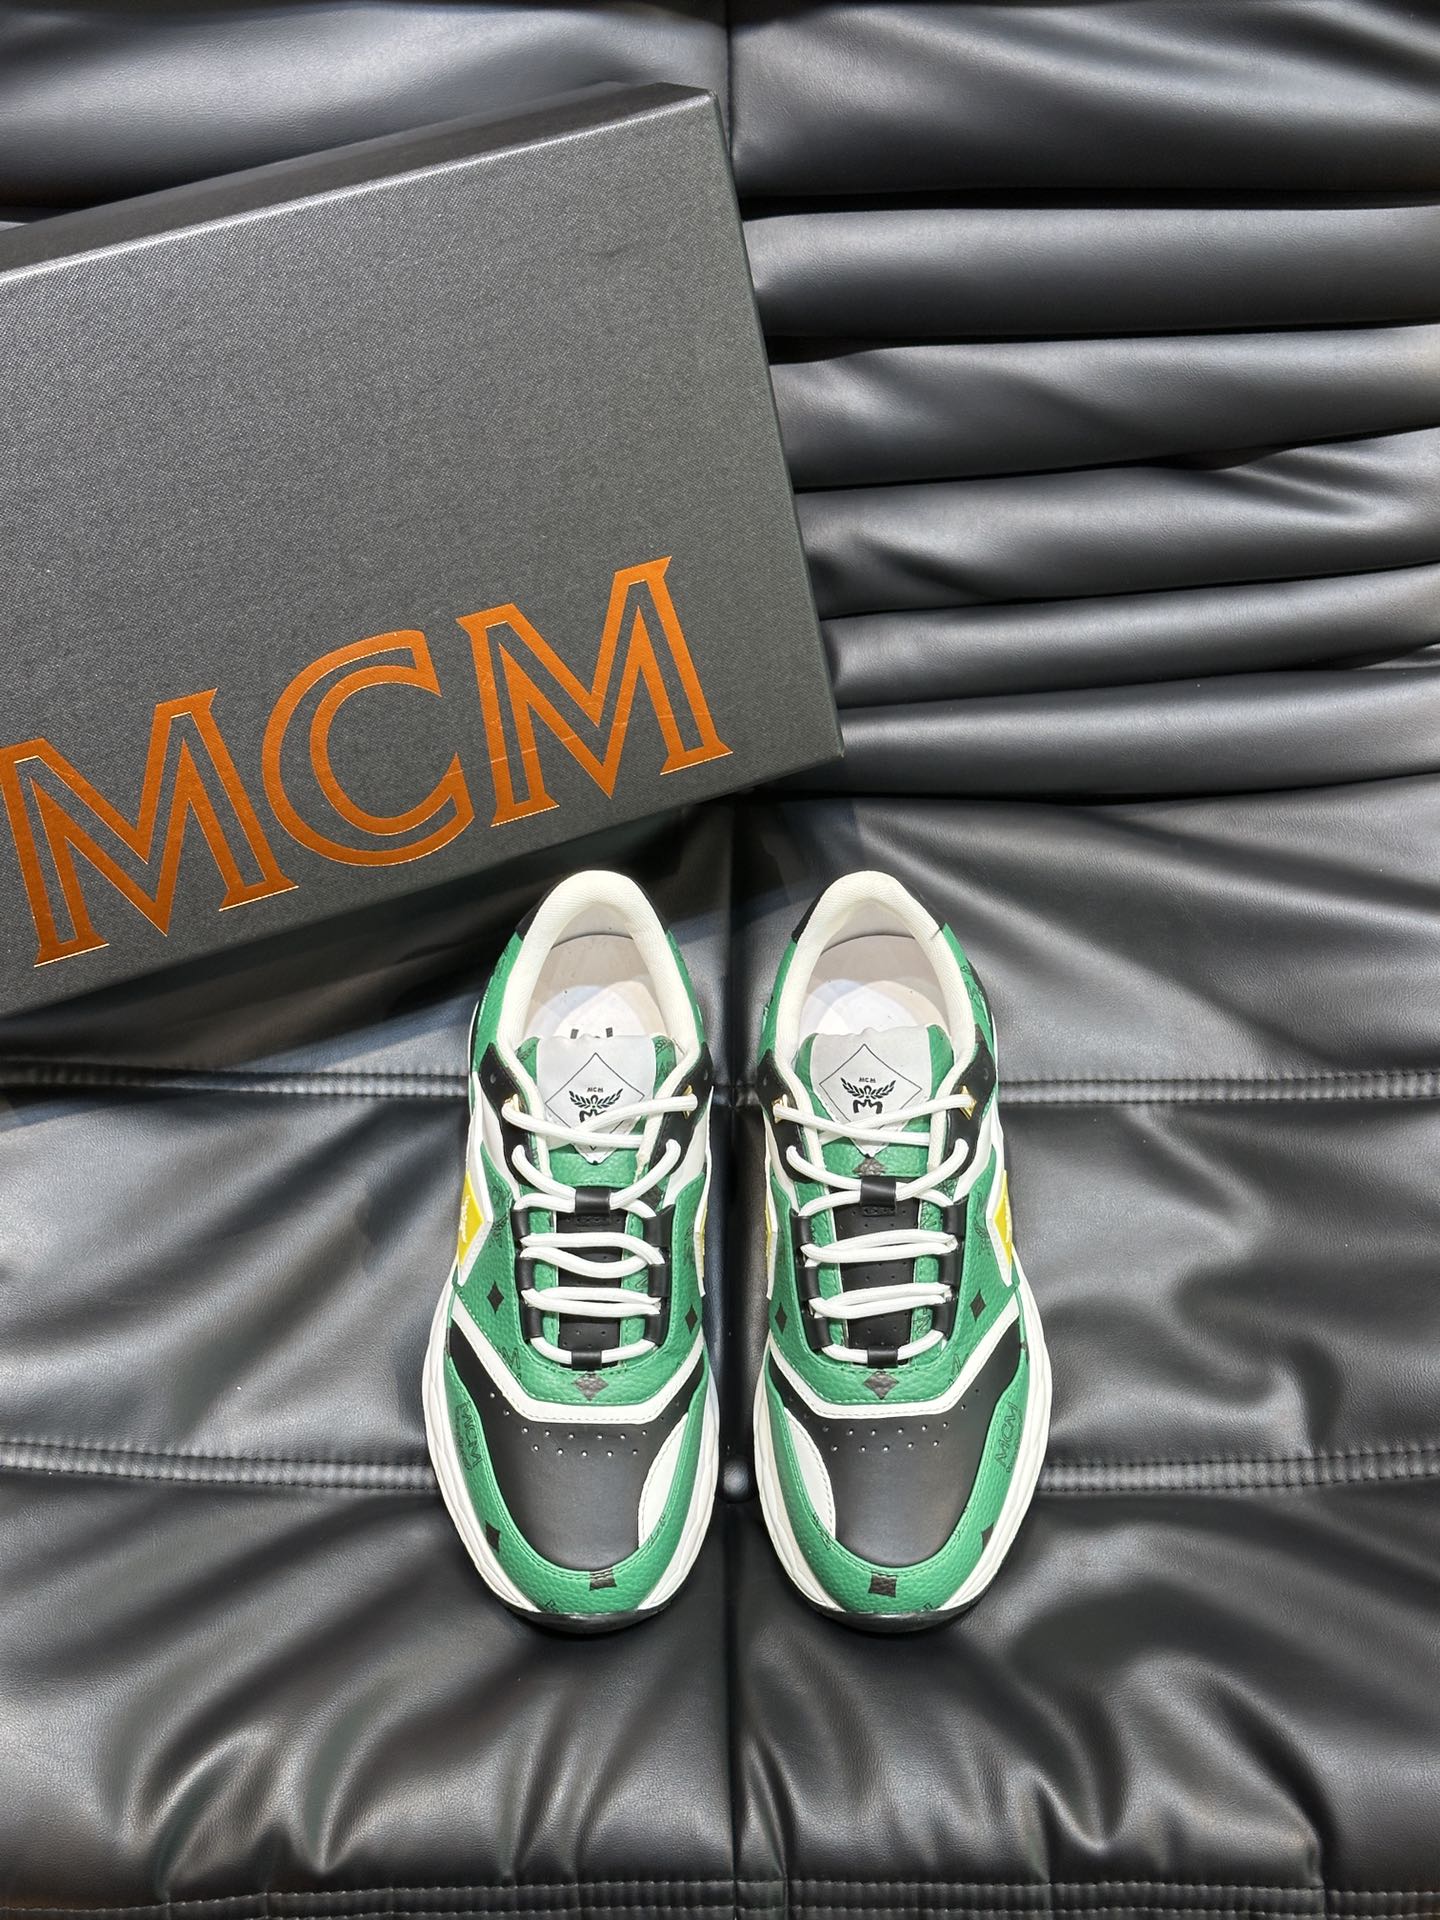 MCM Shoes Sneakers Men Spring/Summer Collection Vintage Casual